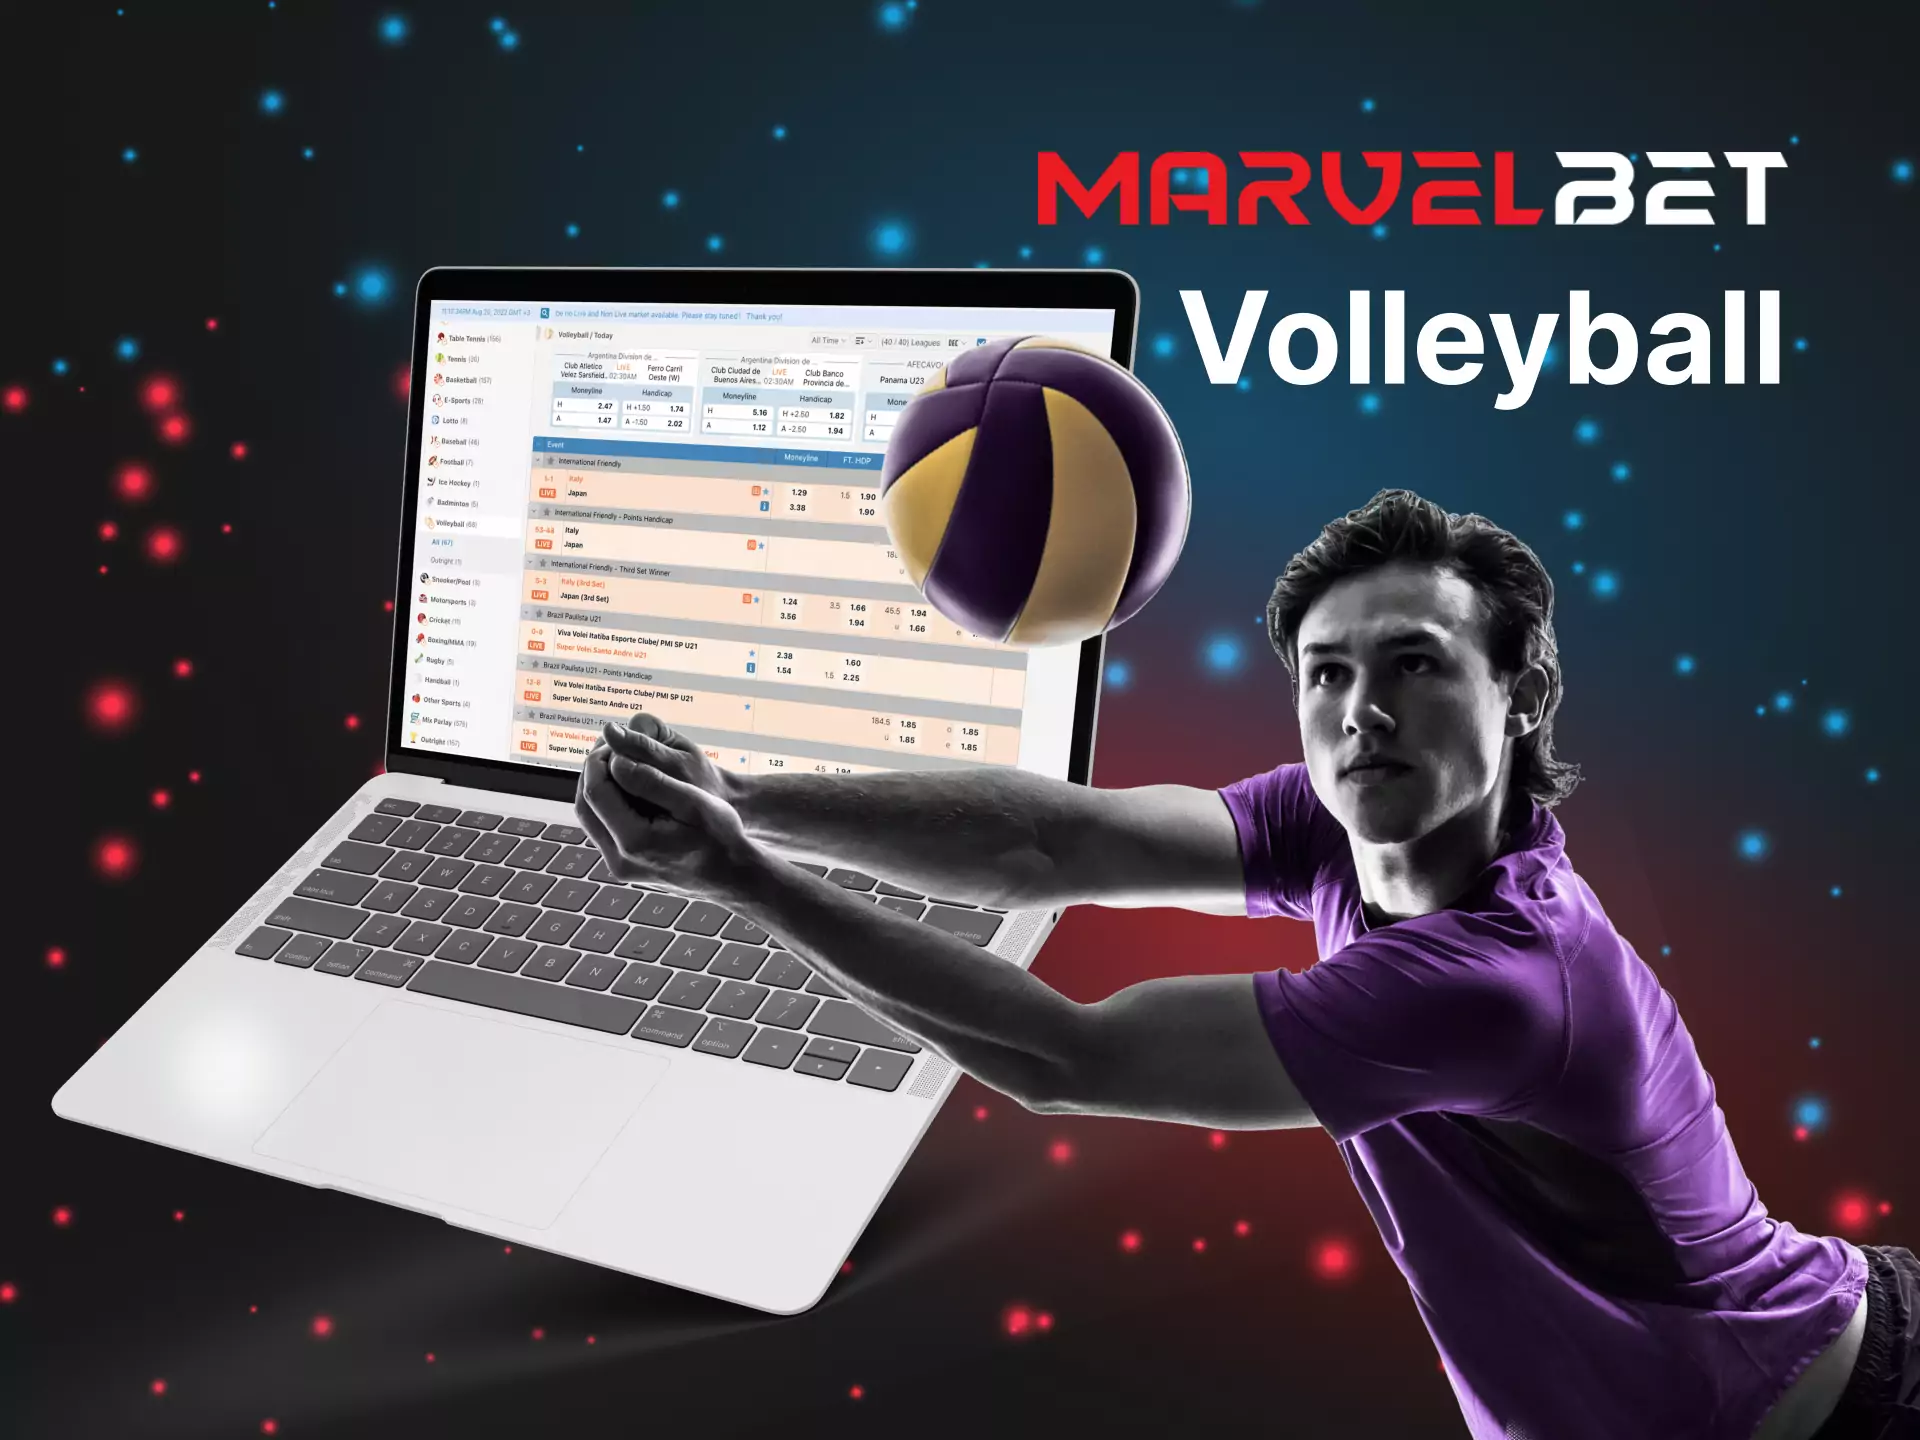 You can place a bet on volleyball on the Marvelbet website.